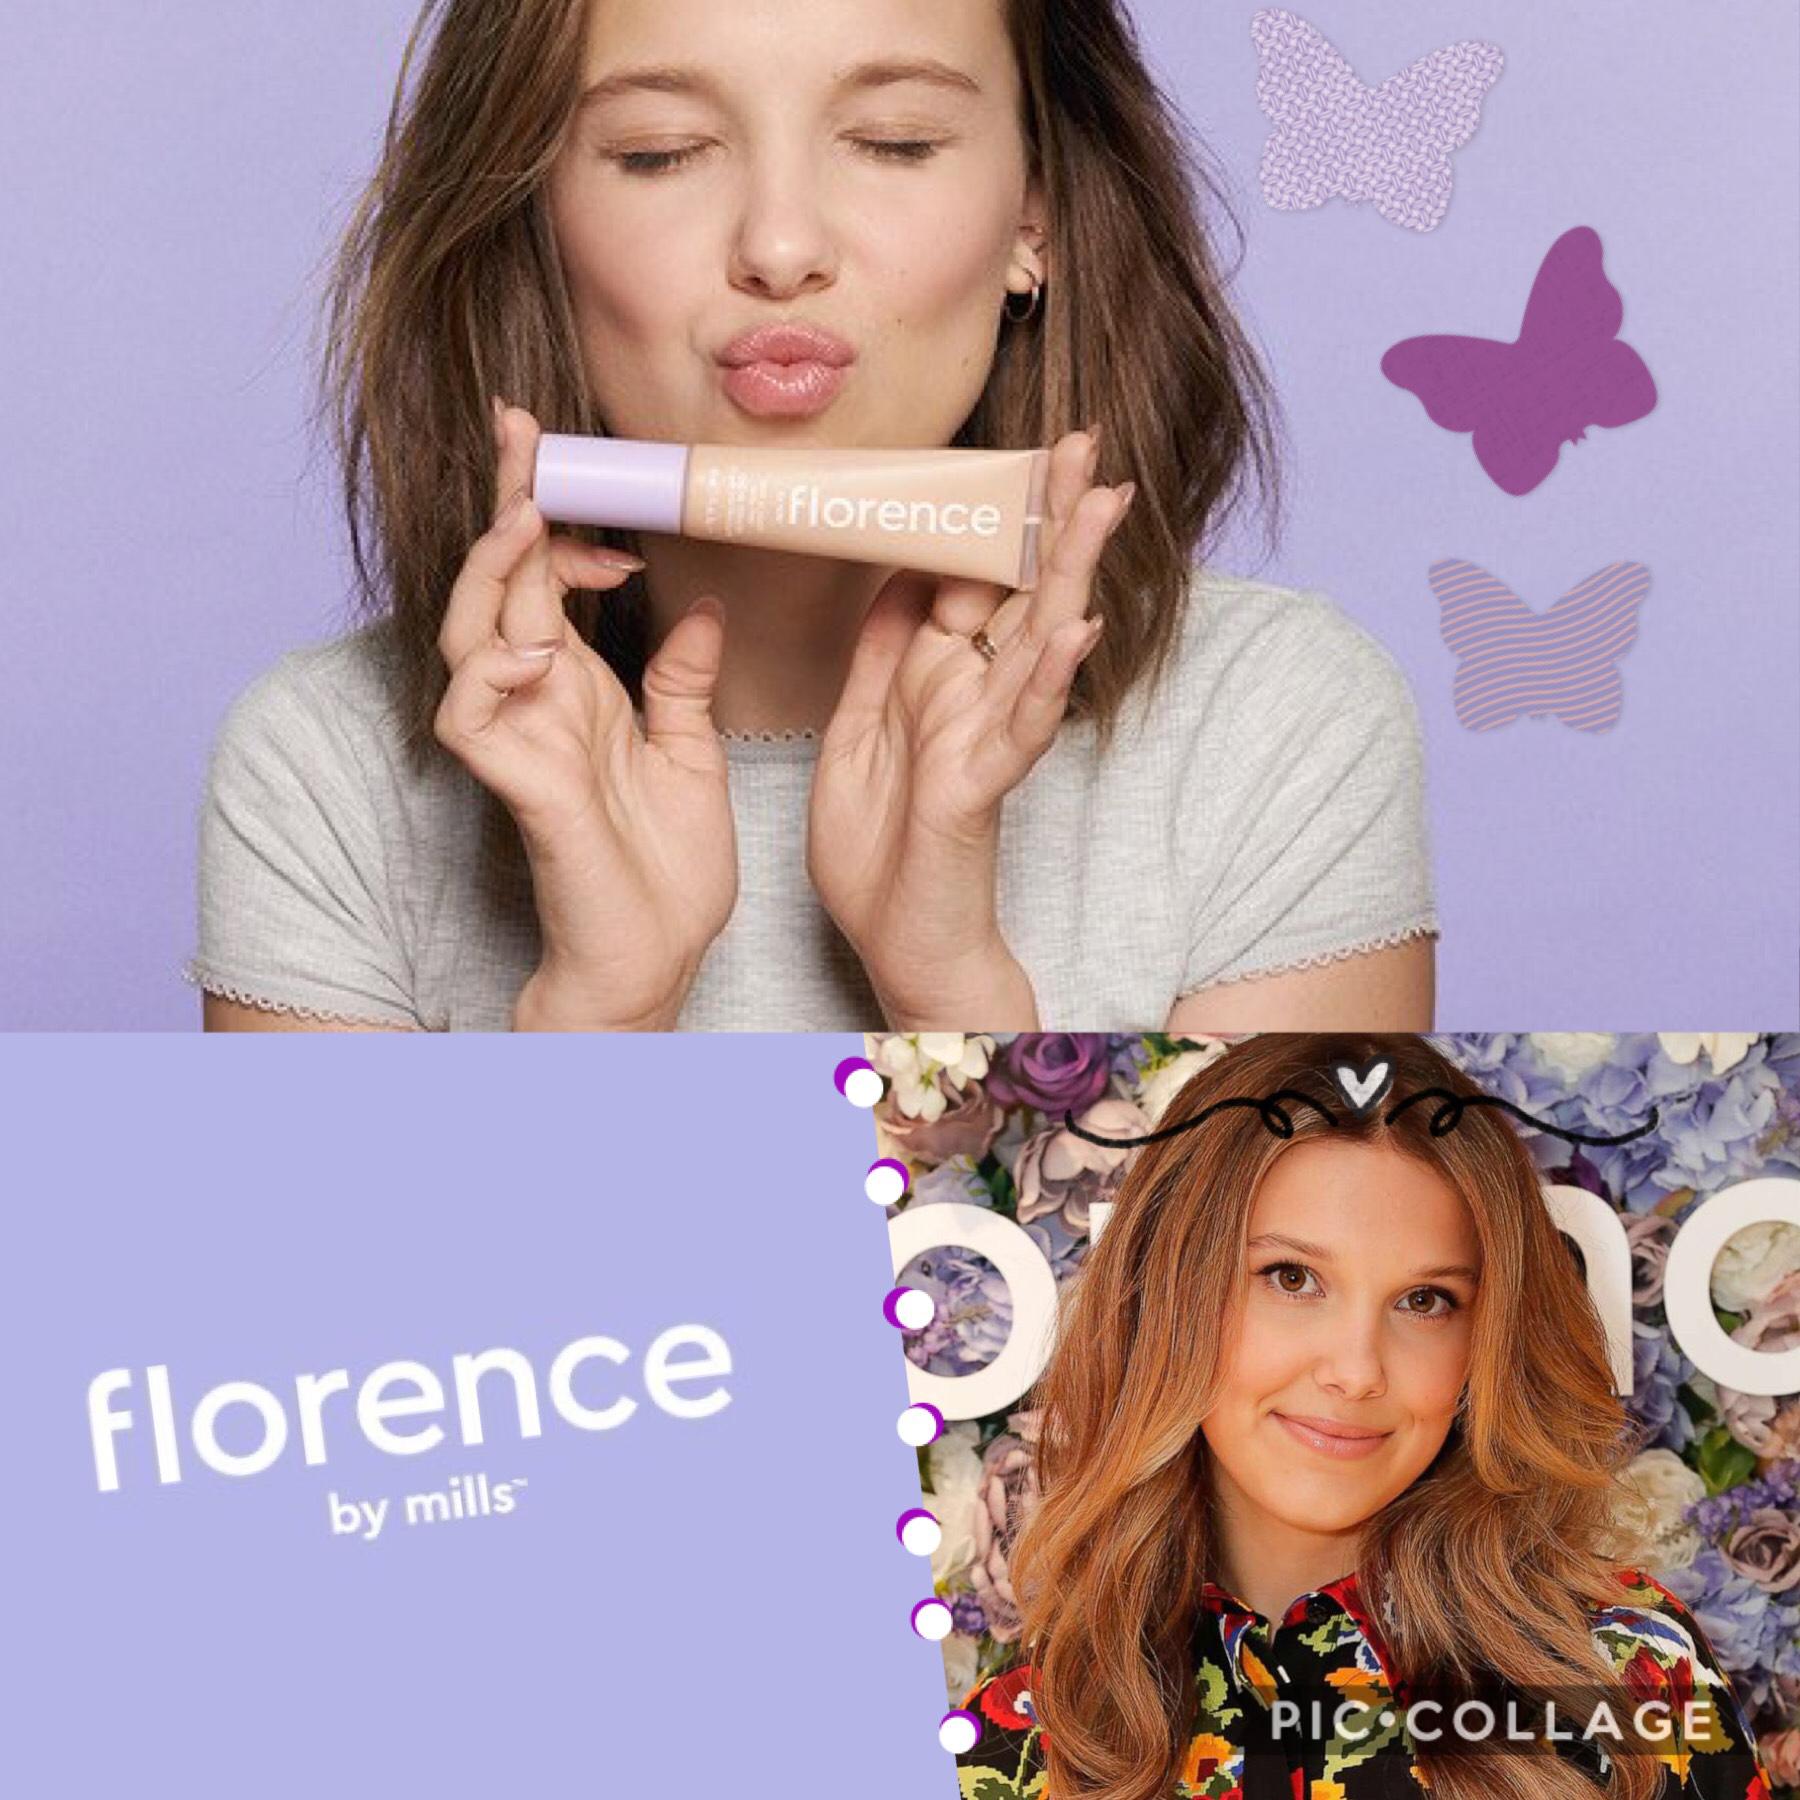 i’m so excited! my Florence package is coming soon;))